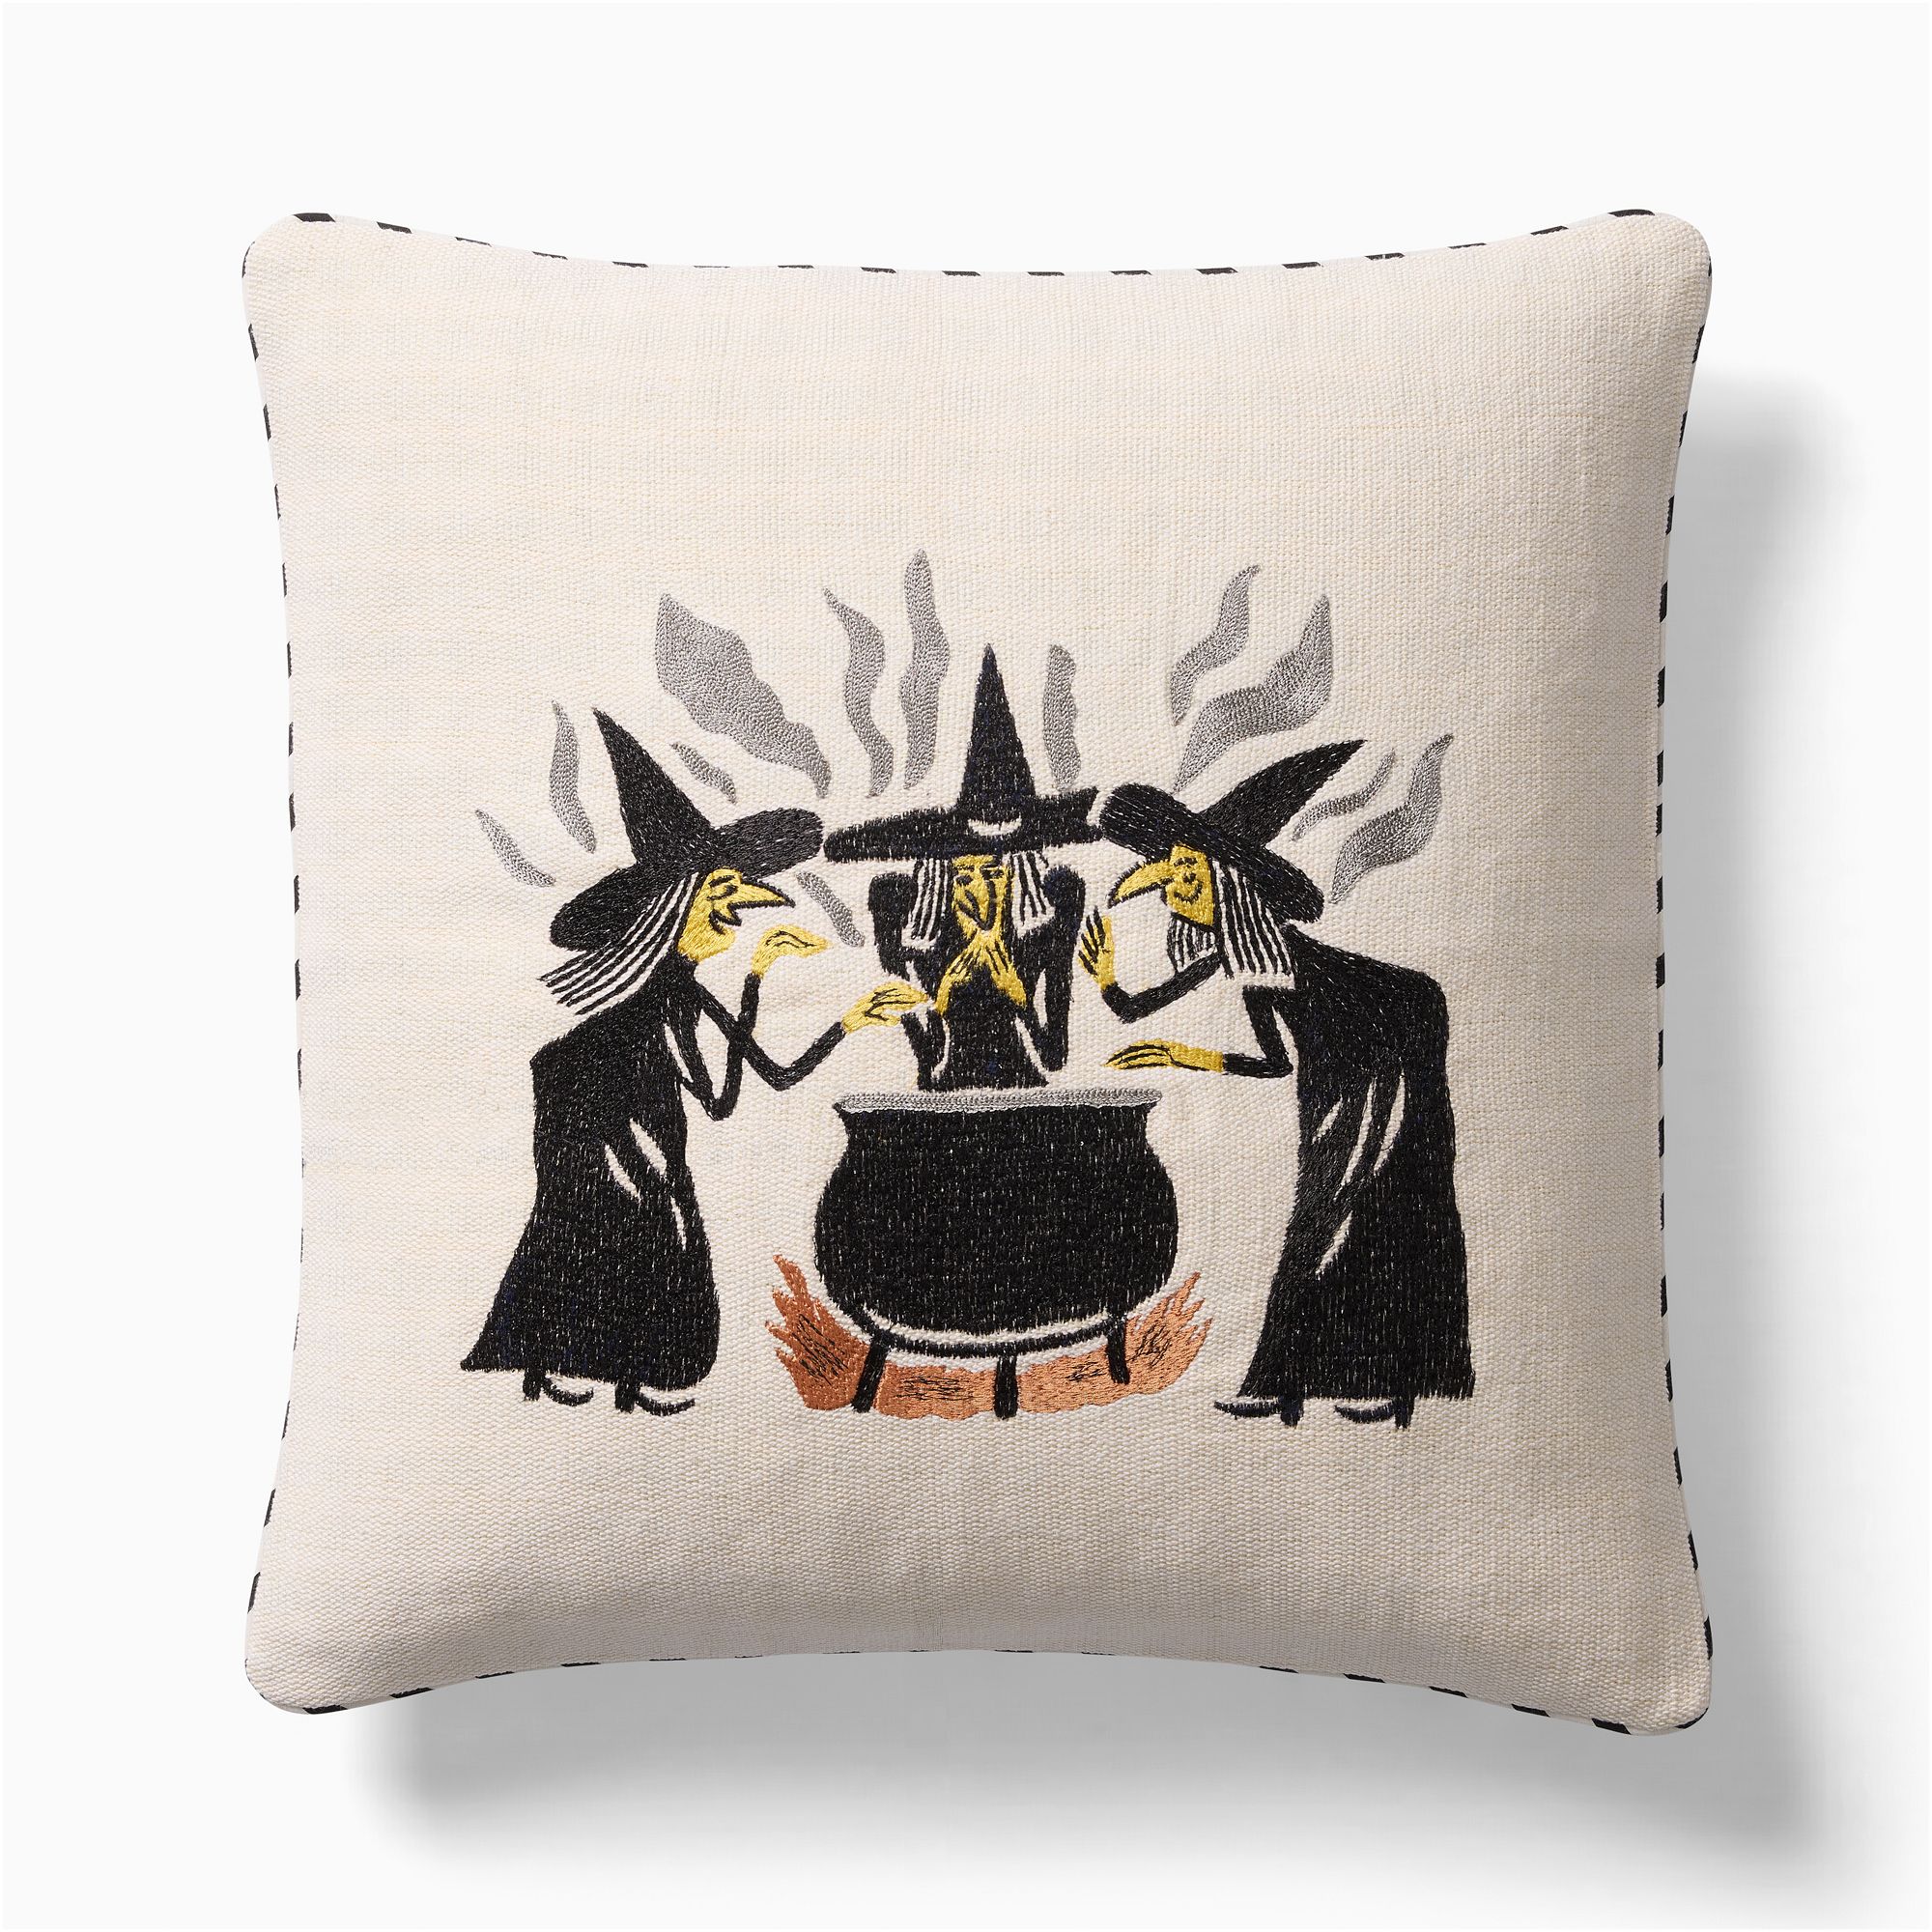 Witches Brewing Pillow Cover | West Elm